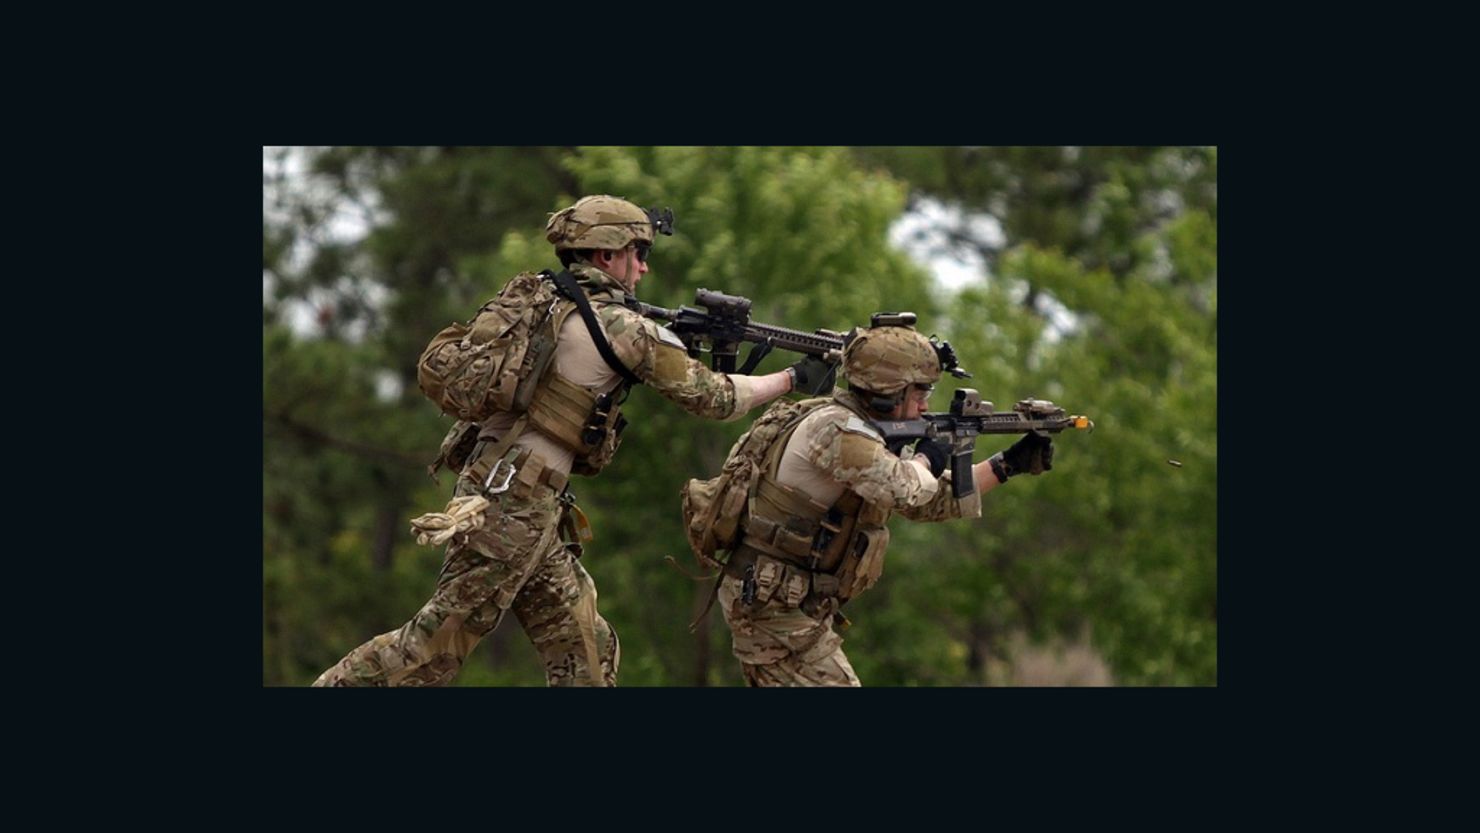 Commandos attack during an exercise at Fort Bragg in April 2012.